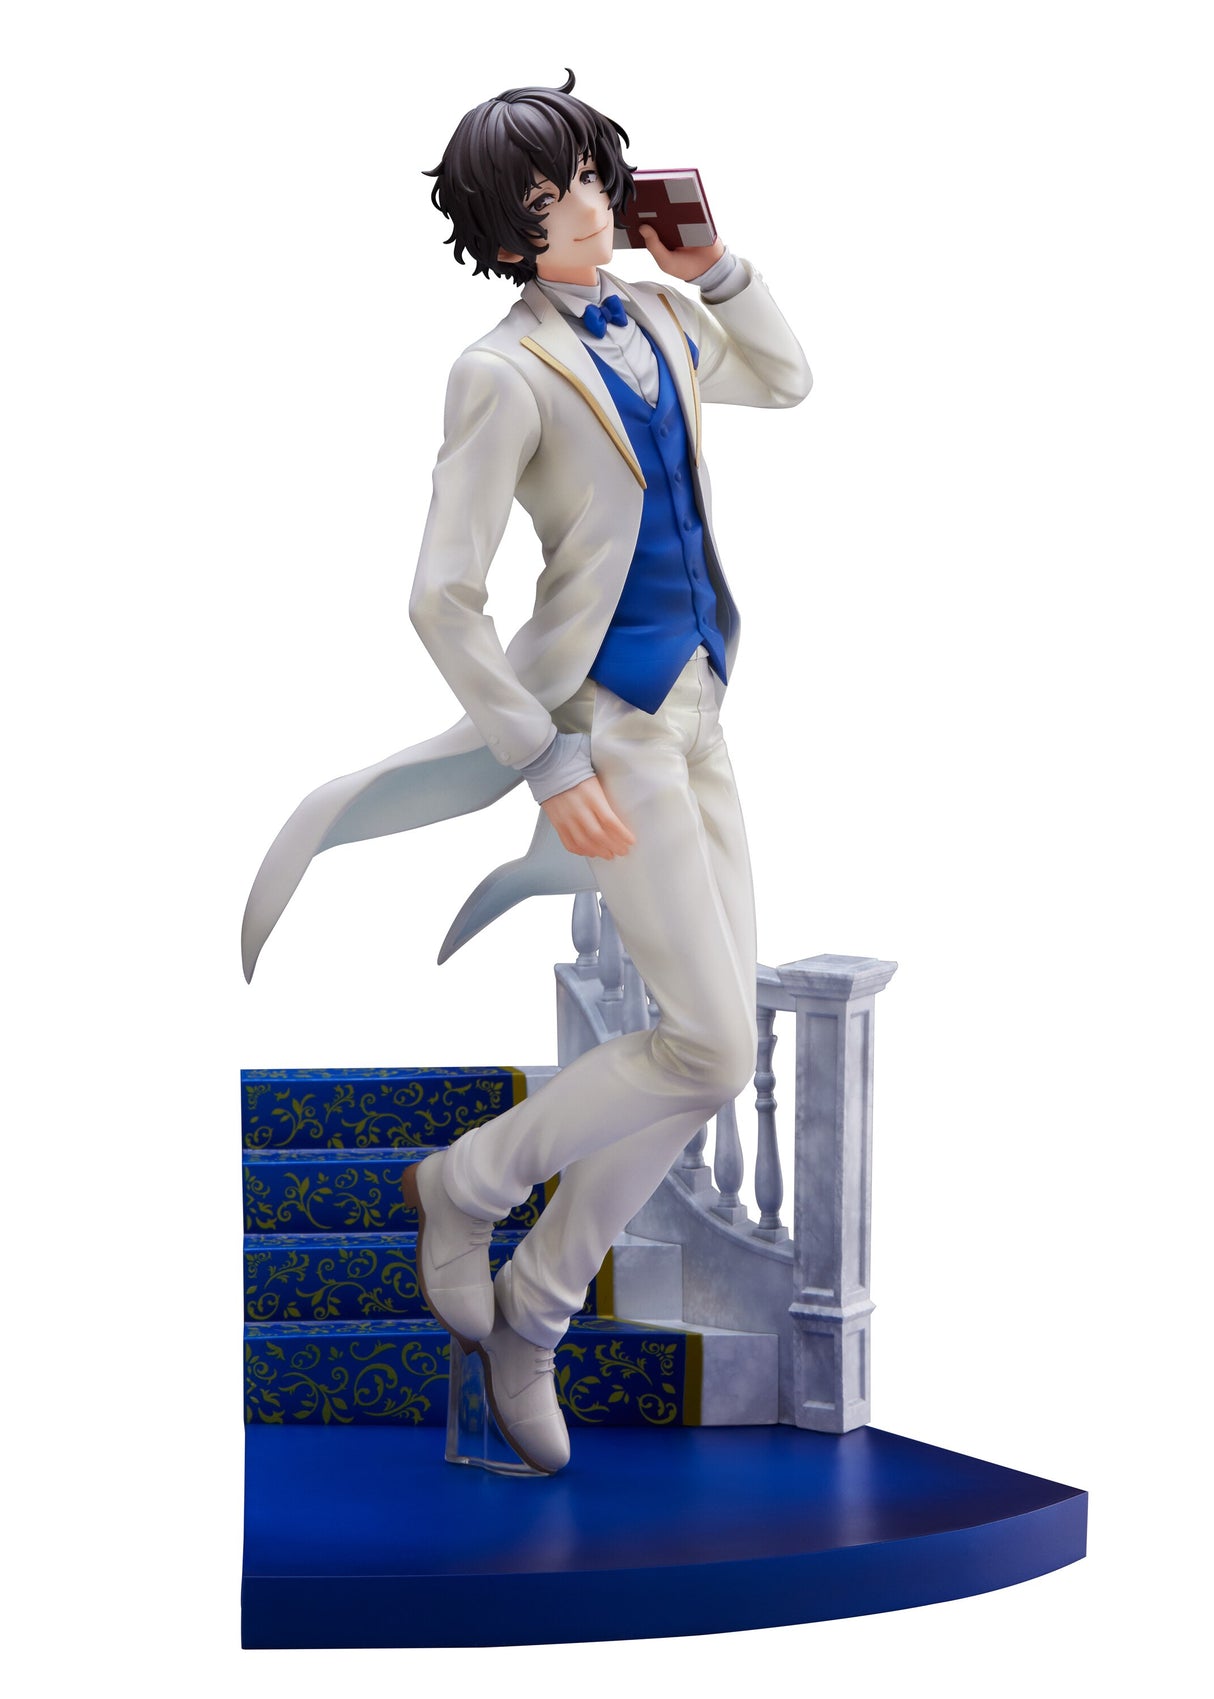 This figurine captures the essence of Dazai & Nakahara in the midst of their playful. If you are looking for more Bungo Stray Dogs Merch, We have it all! | Check out all our Anime Merch now!